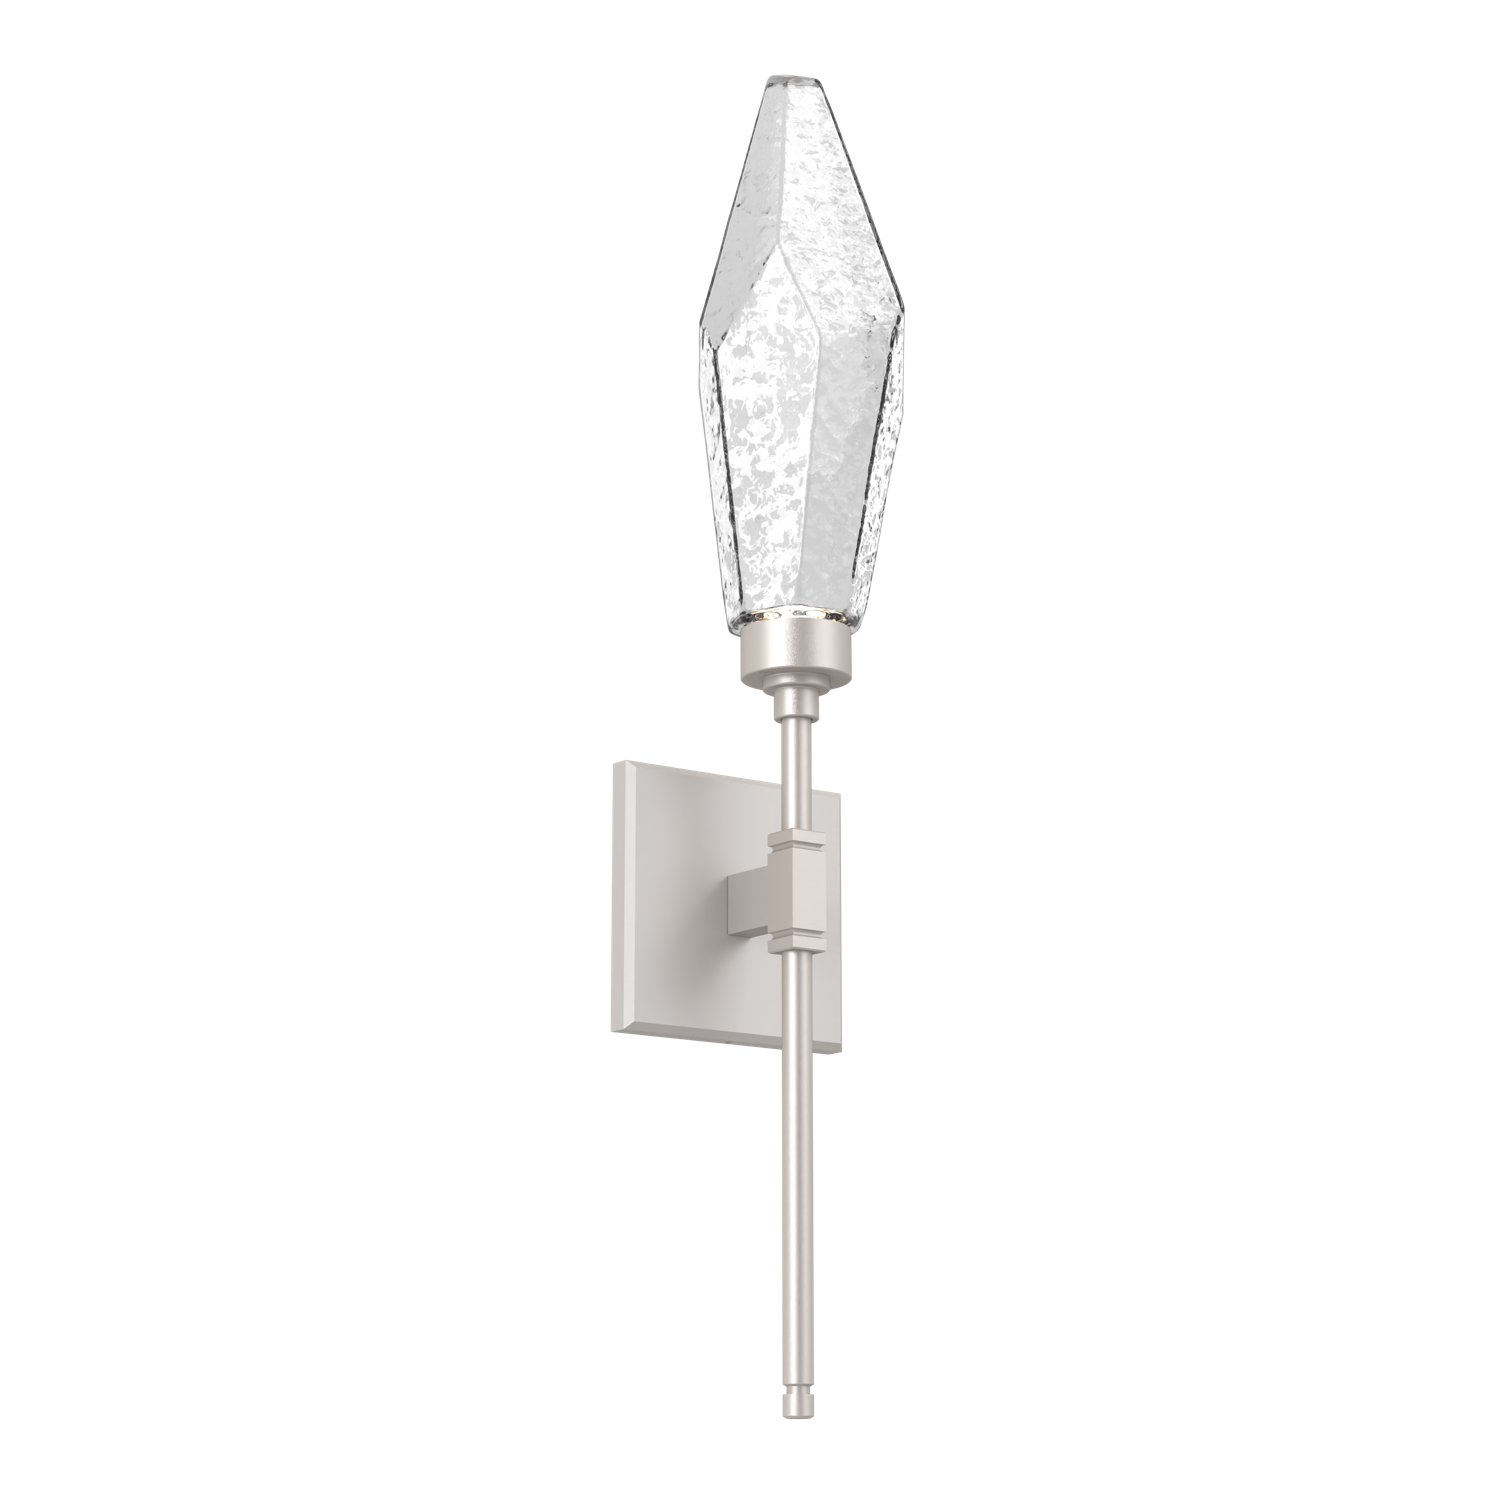 IDB0050-04-BS-CC-Hammerton-Studio-Rock-Crystal-ada-certified-belvedere-wall-sconce-with-beige-silver-finish-and-clear-glass-shades-and-LED-lamping